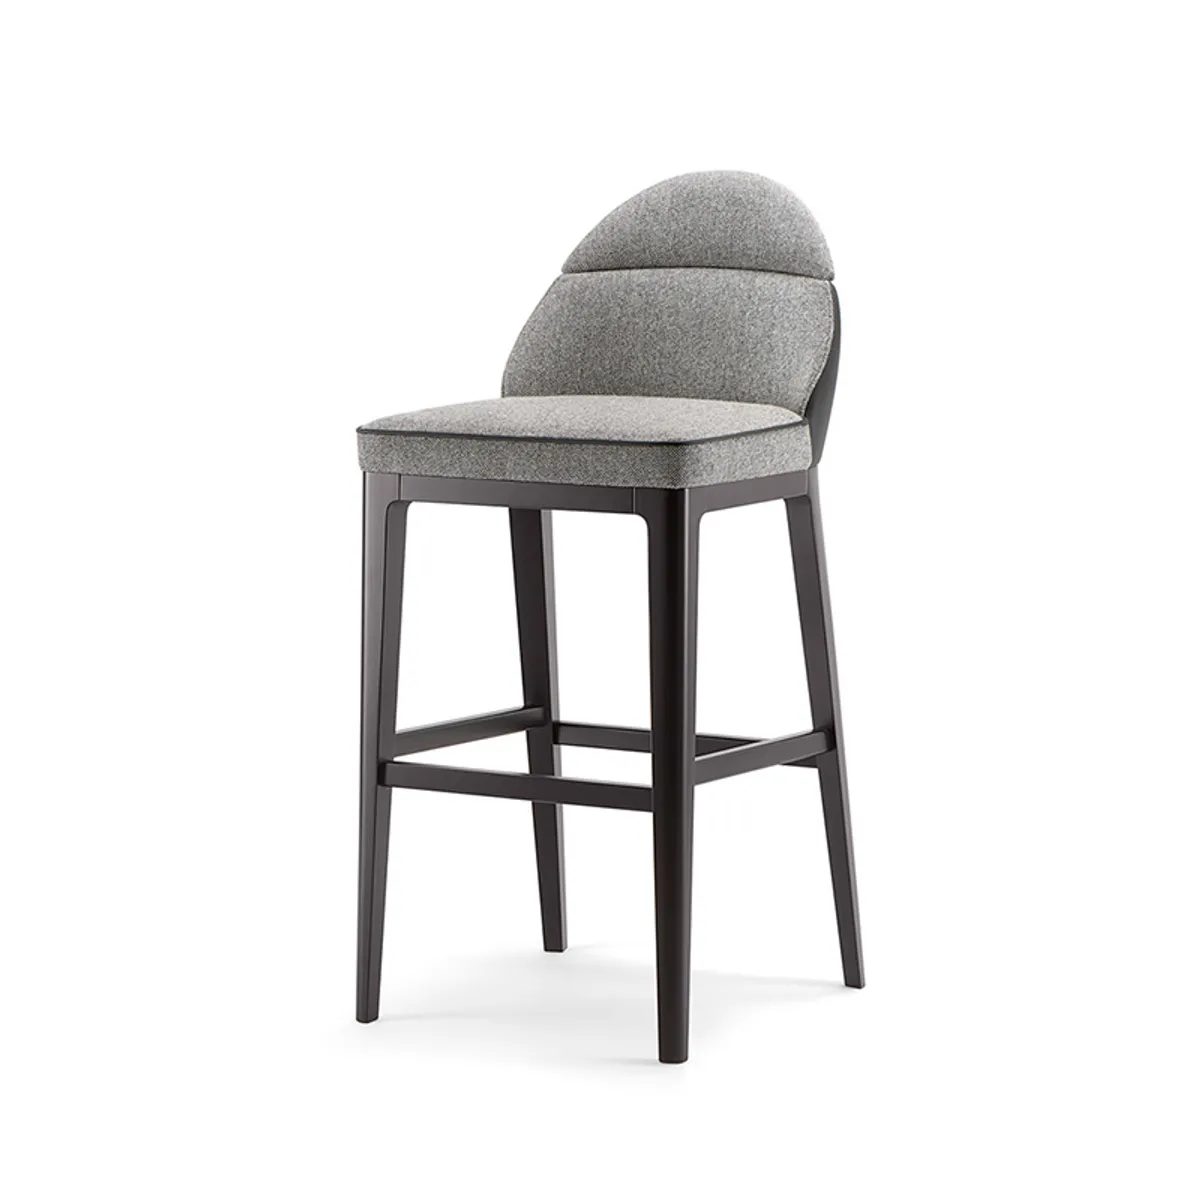 Dallas Bar Stool Contemporary Upholstered Furniture Insideoutcontracts